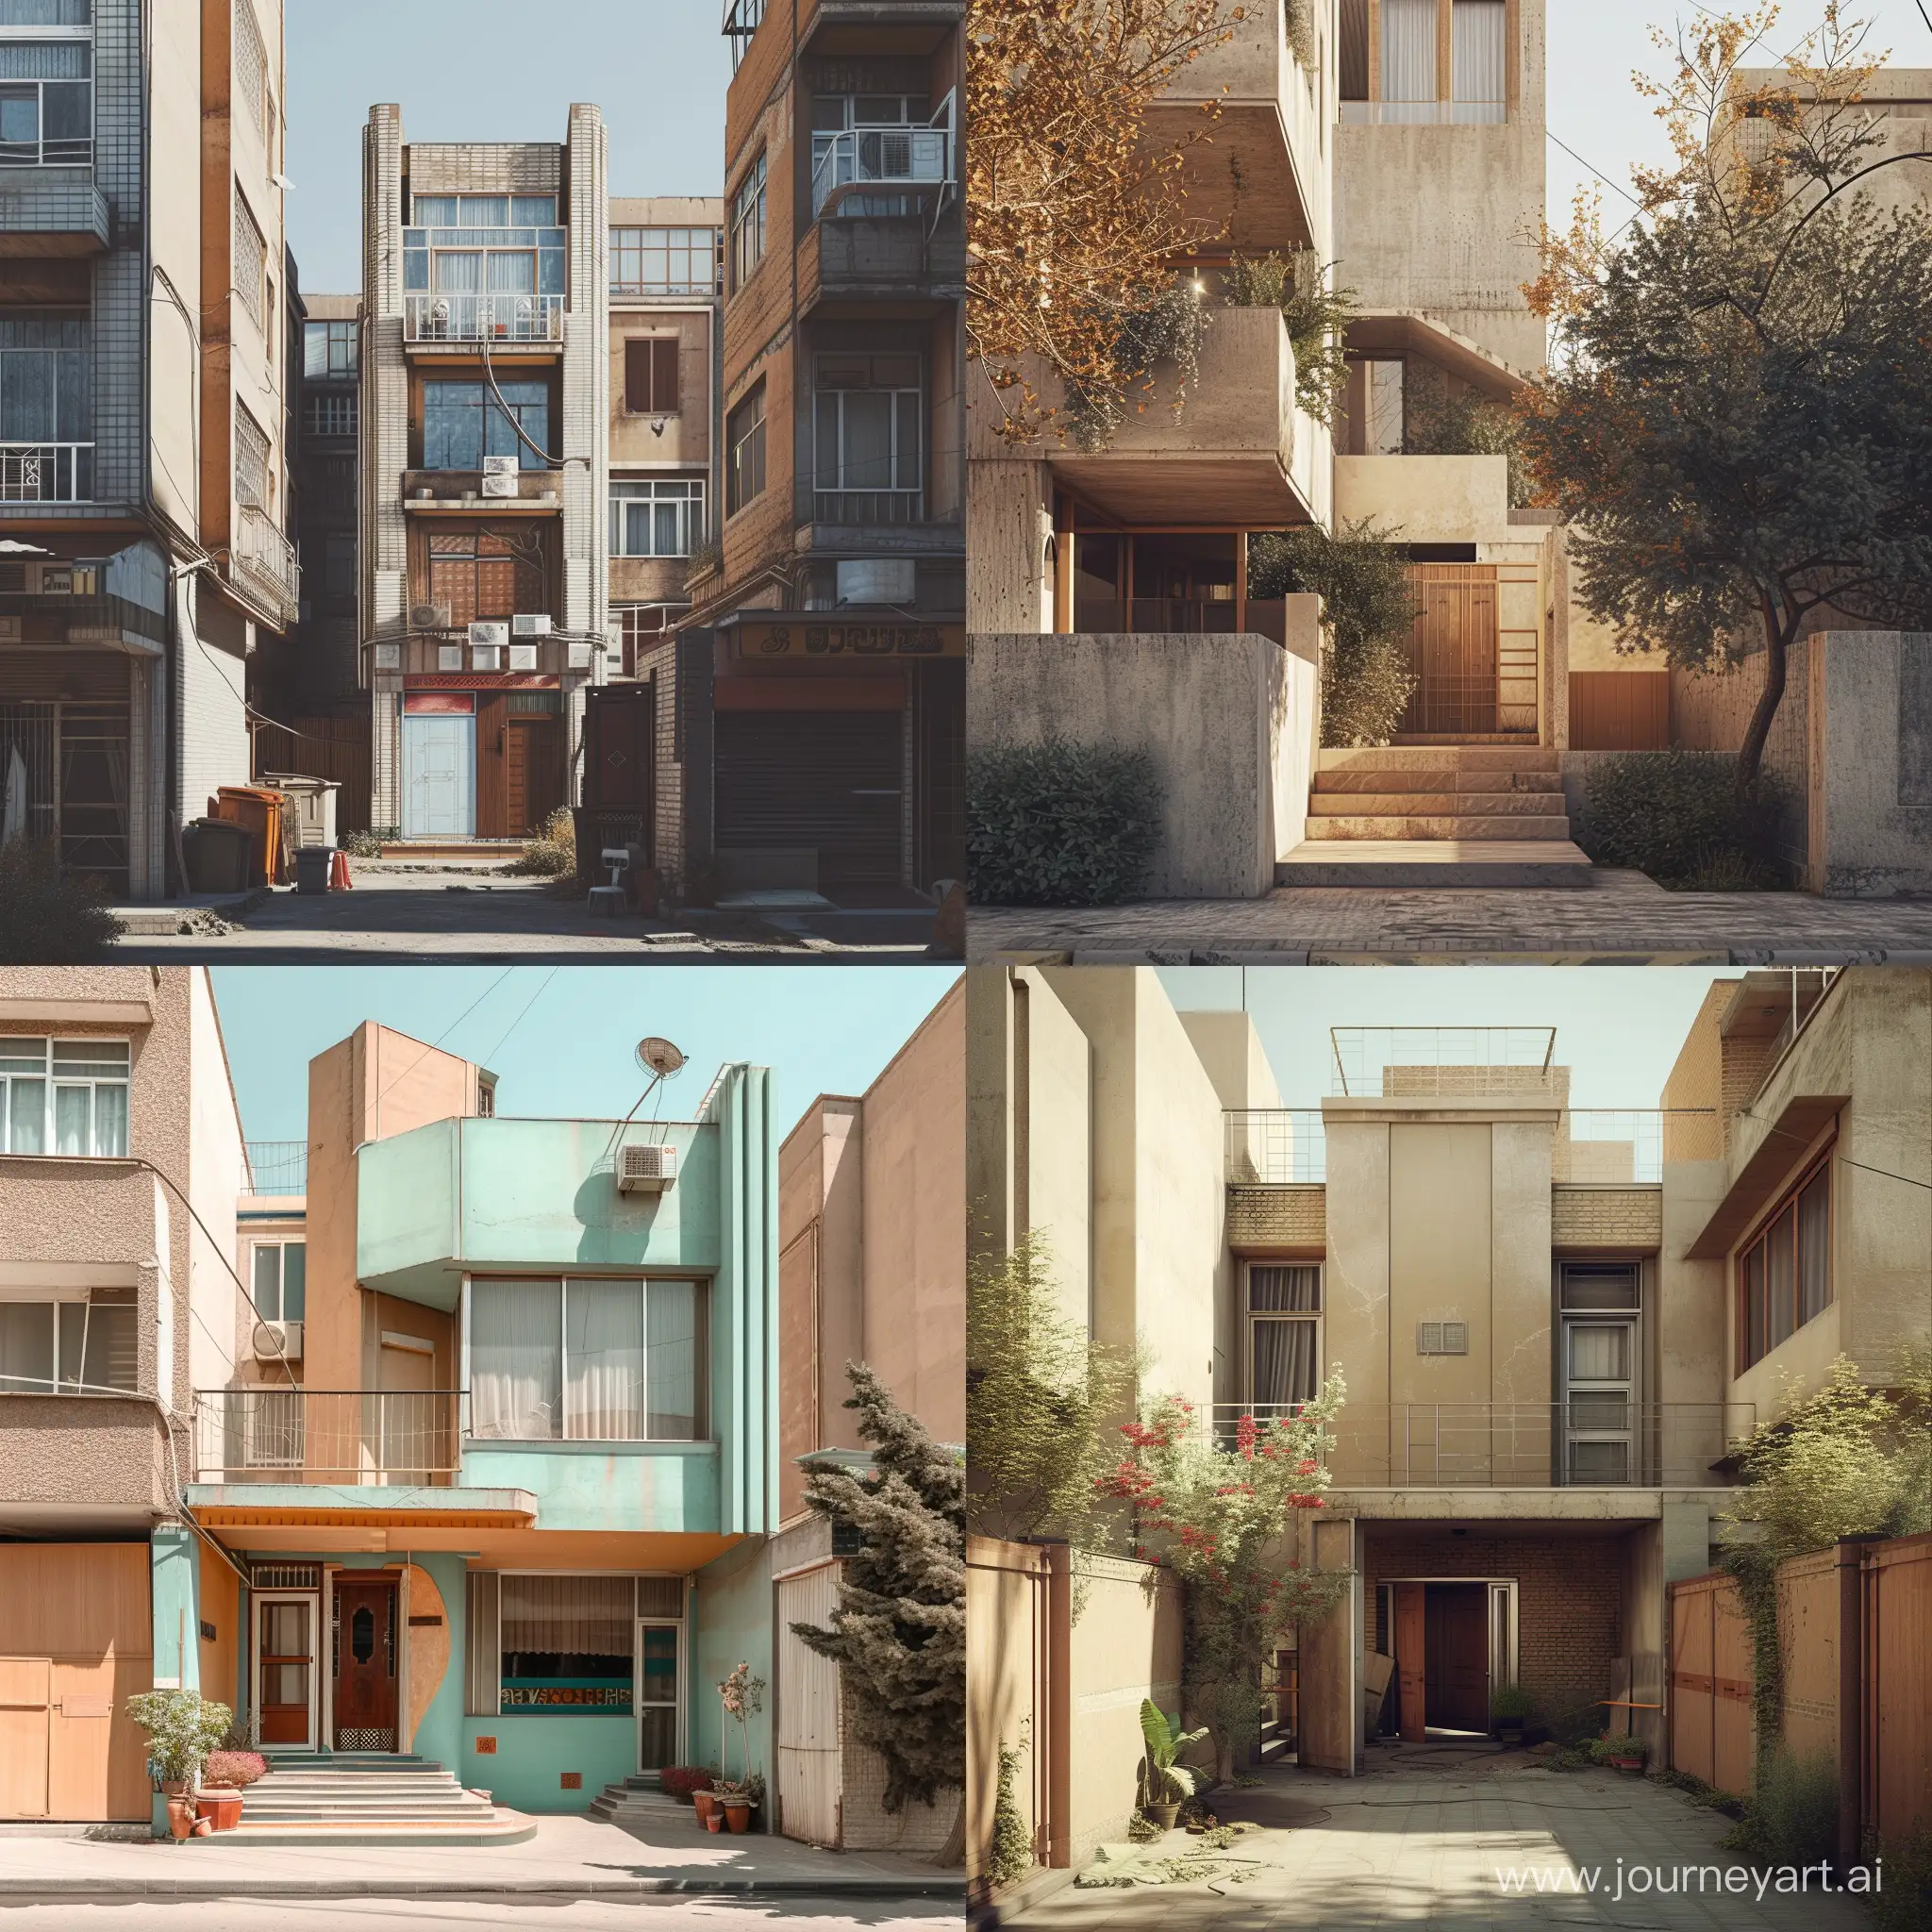 A collage architecture in the urban space of Tehran. Changes should not be exaggerated. This collage-like architecture can be seen in buildings. Focus on the entrance of houses. Collage can be an inoculation of futurist architecture and brutalist style of Africa. The output should be displayed like a realistic photo.